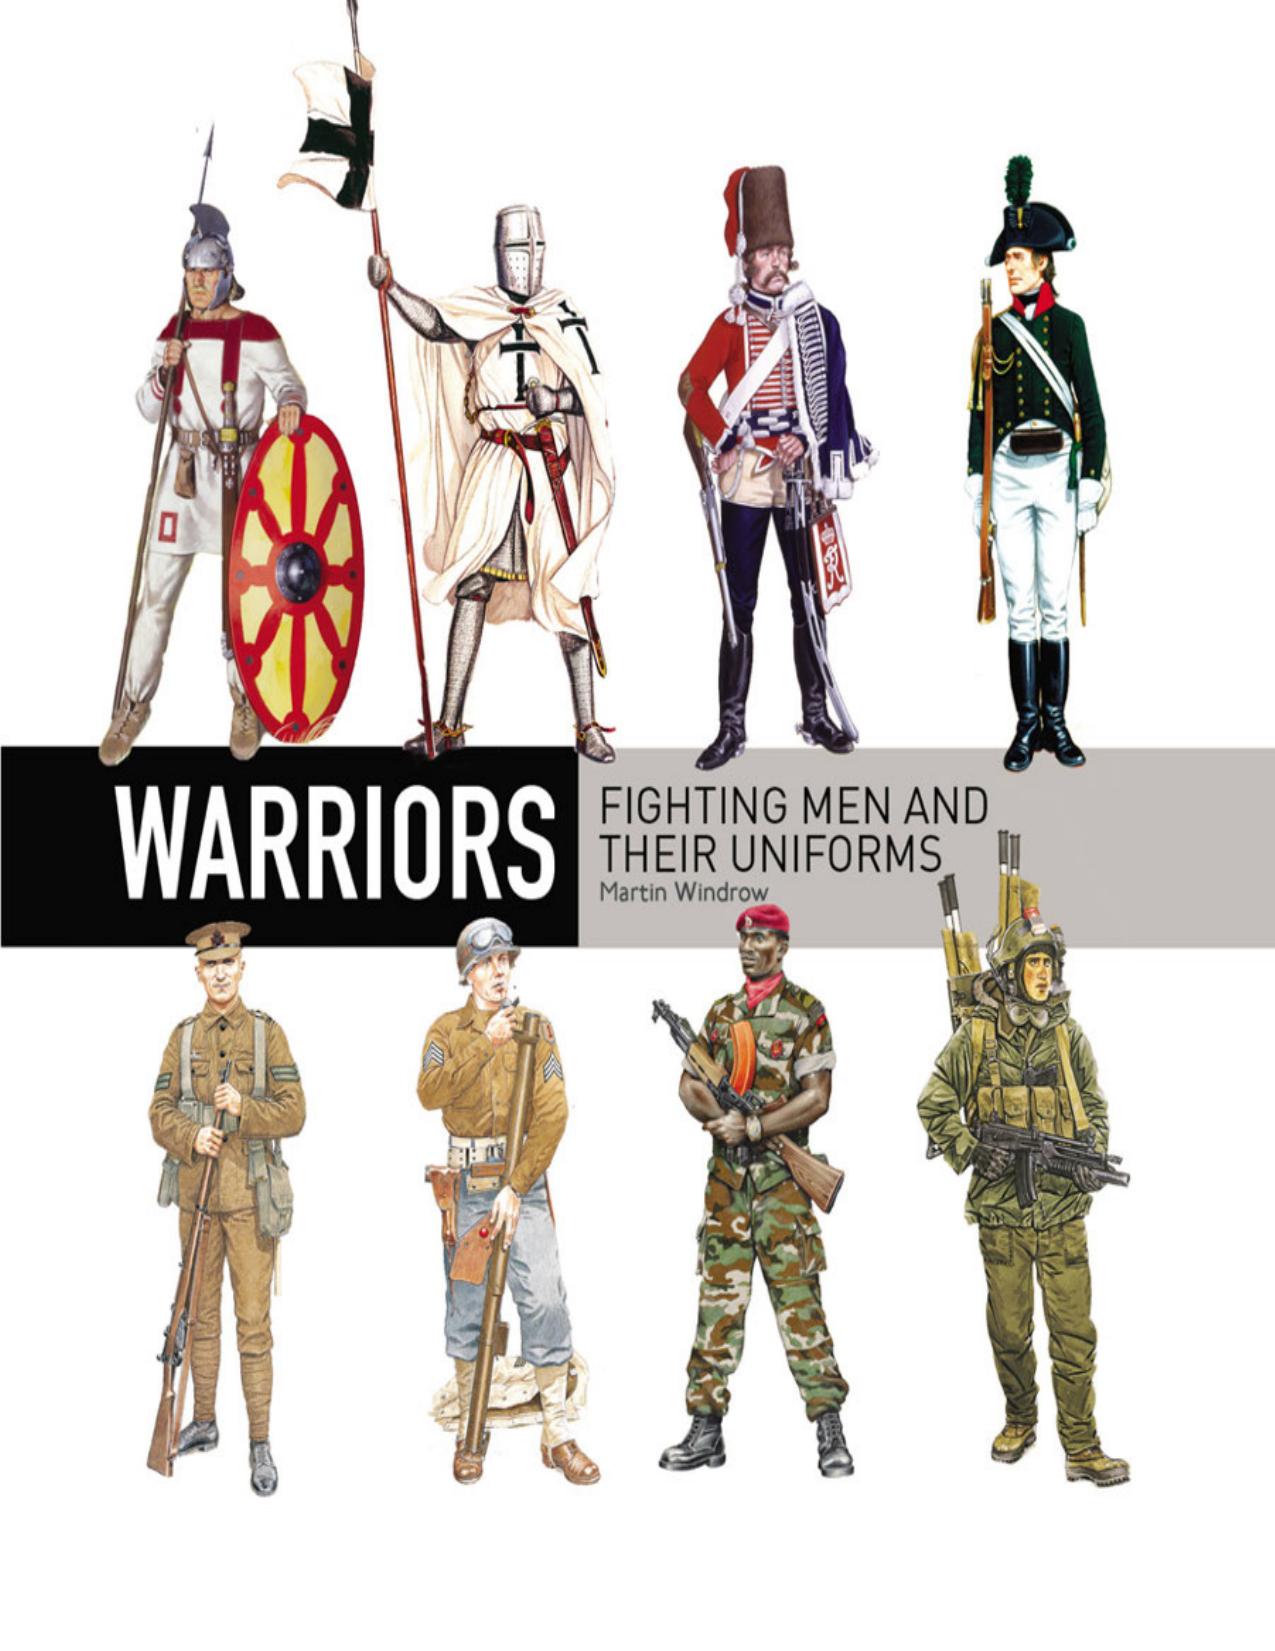 Warriors: Fighting Men and their Uniforms (Osprey General Military) by Martin Windrow